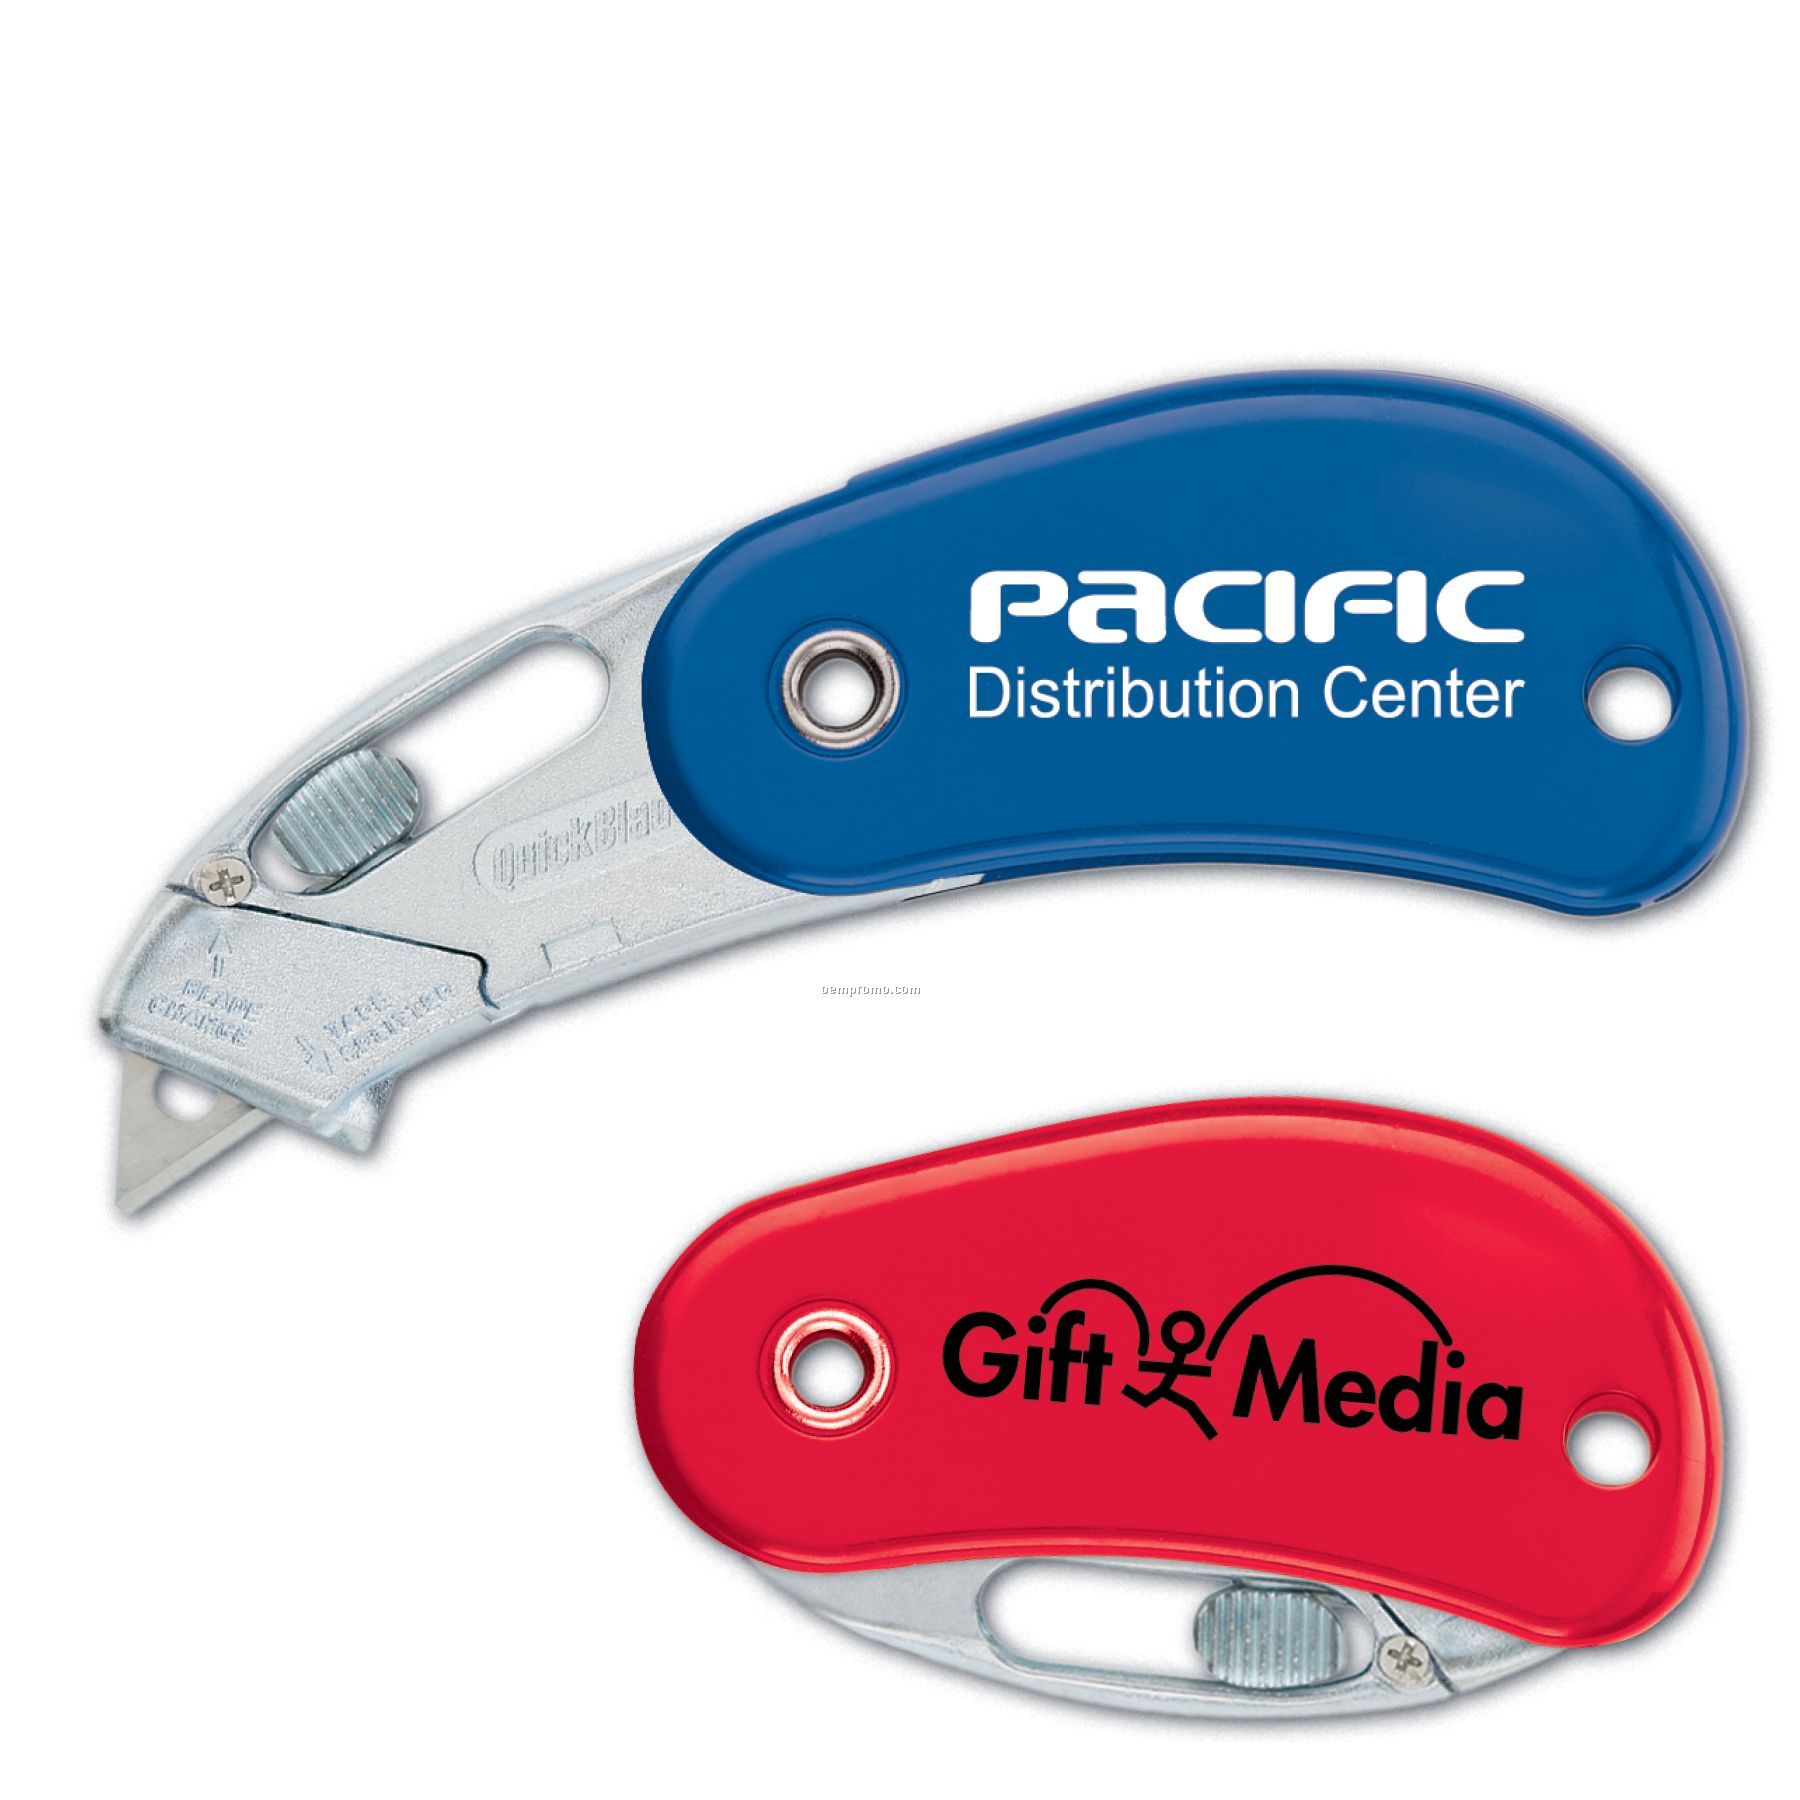 Pocket Safety Cutters - Spring-back Box Openers